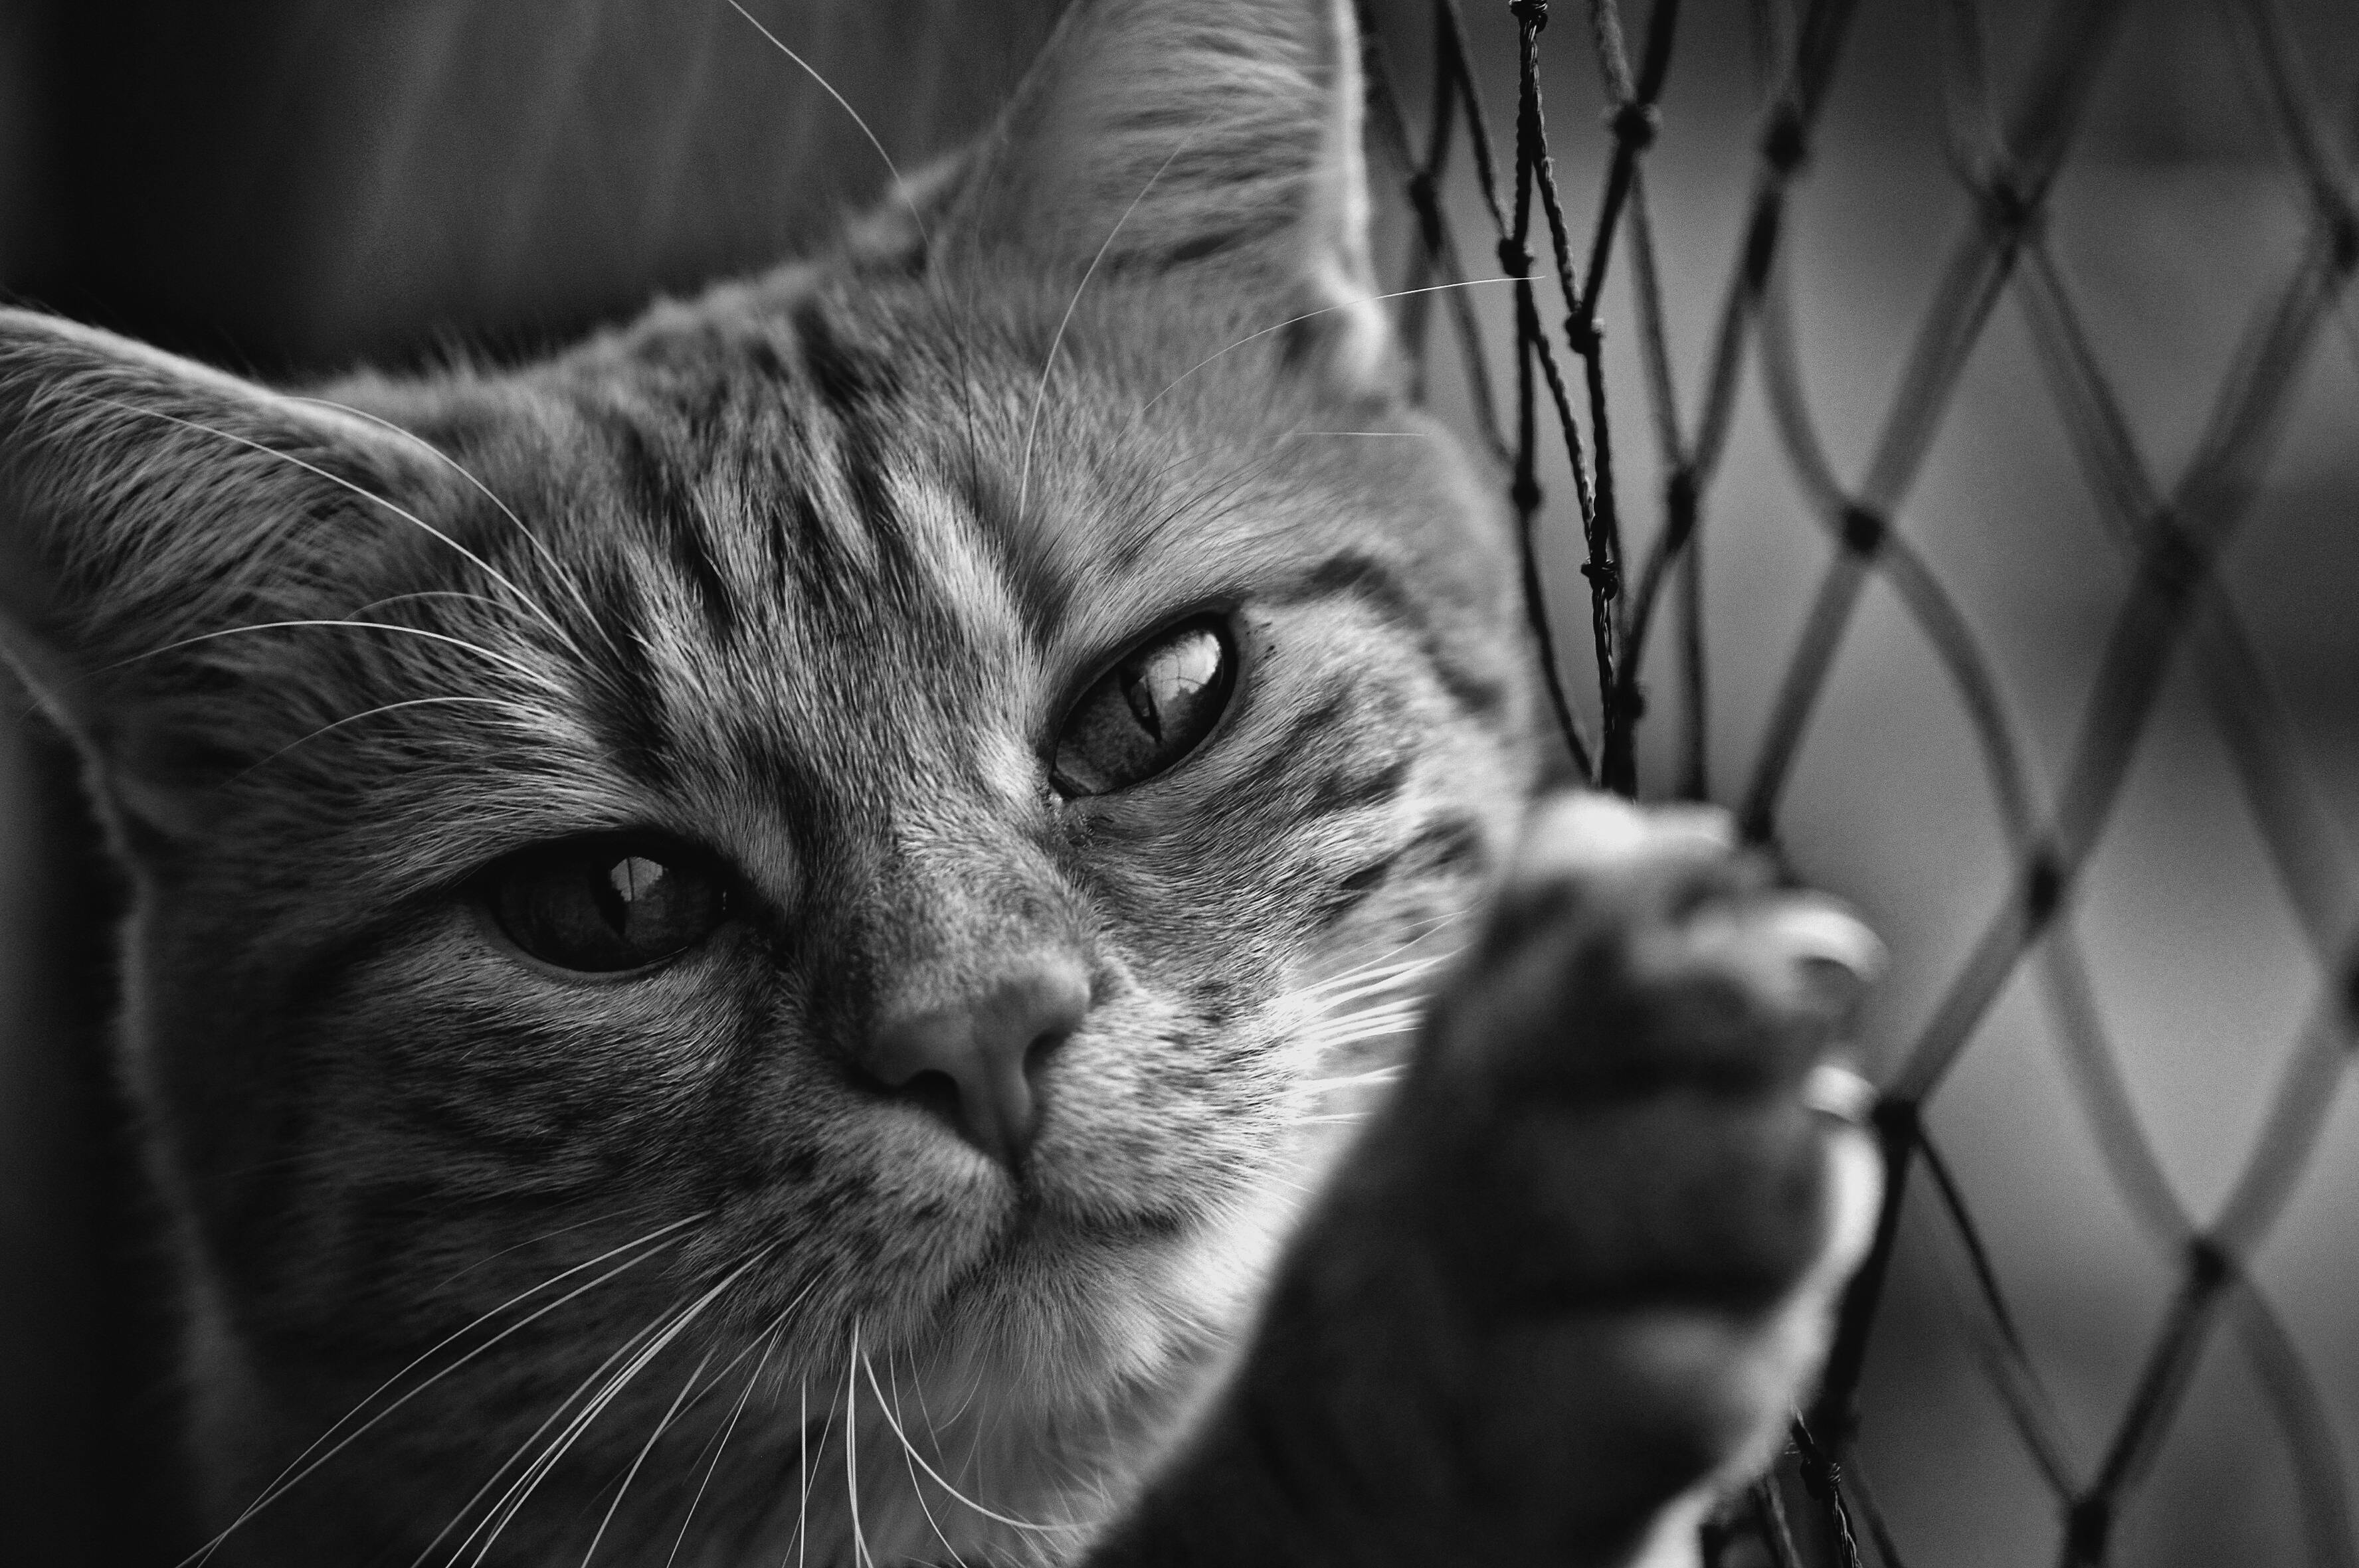 close up grayscale photo of cat leaning on chain link fence